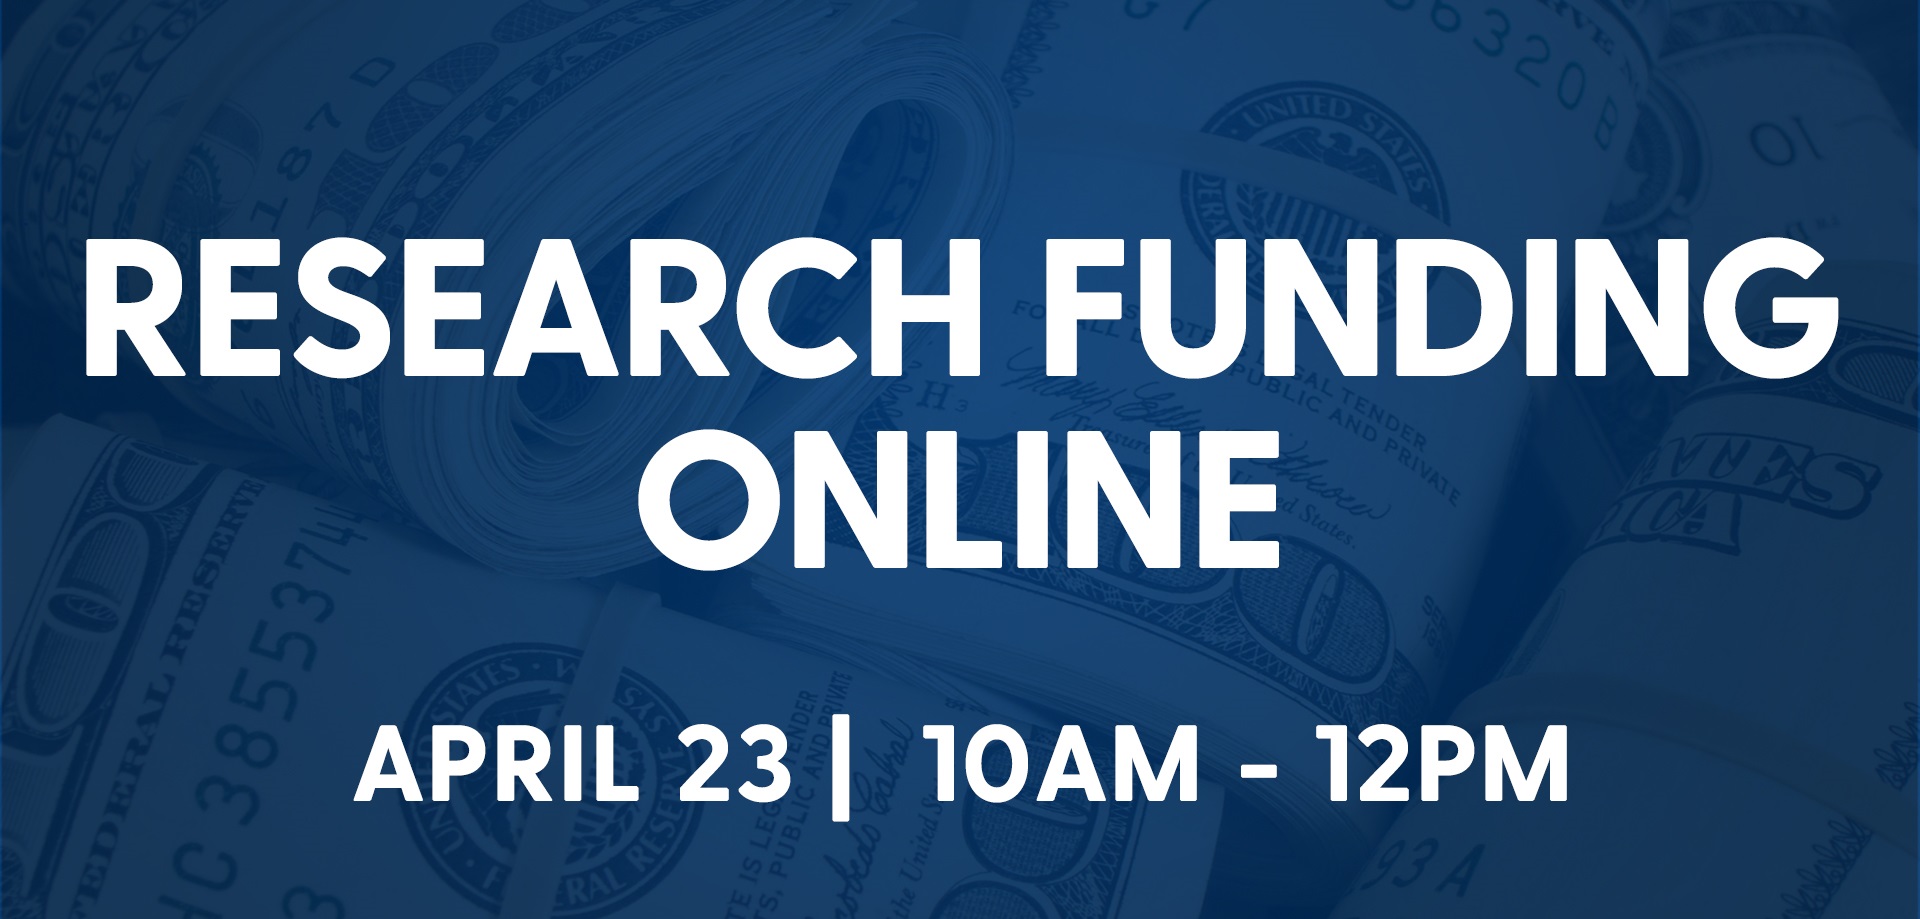 Research Funding Online